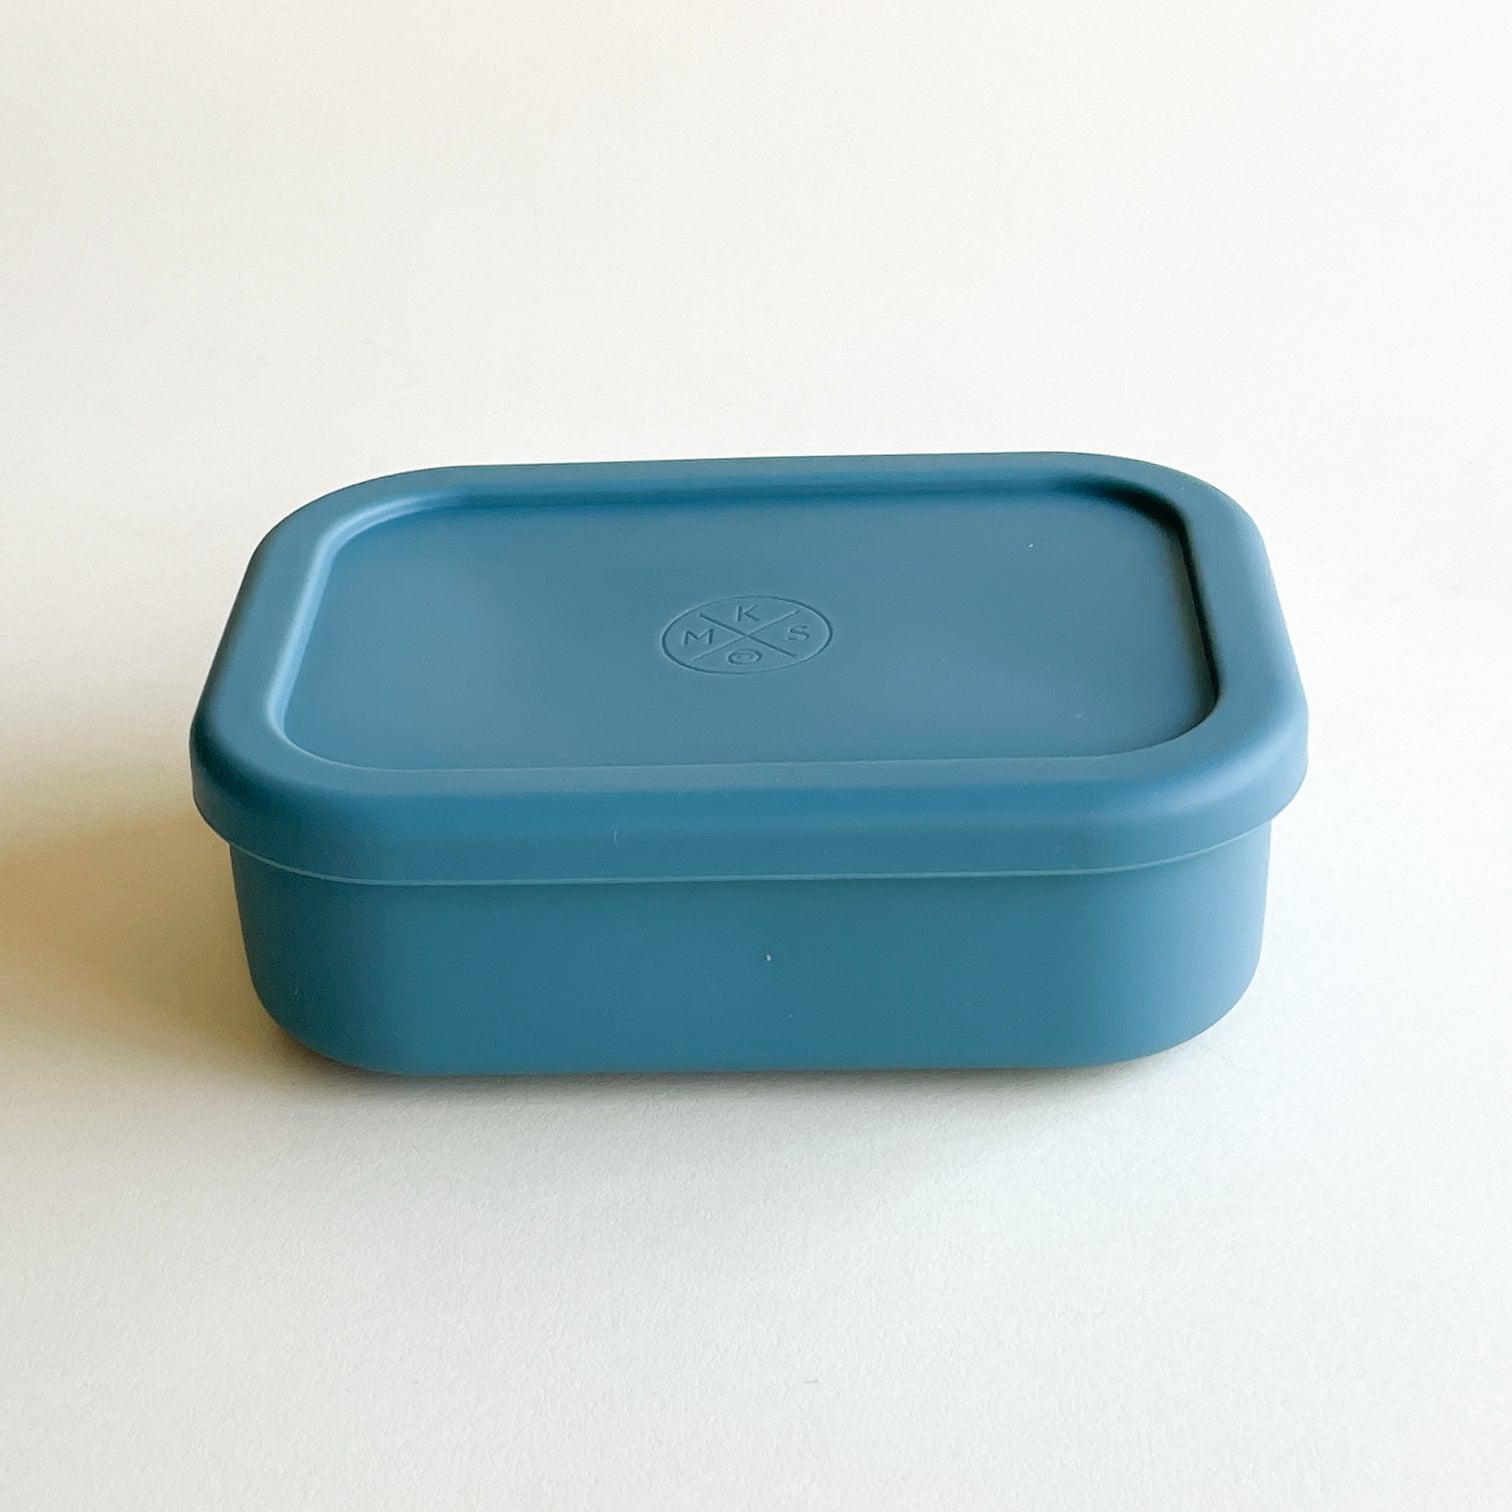 Silicone Bento Lunch & Snack Box for kids adults Teal MKS Miminoo